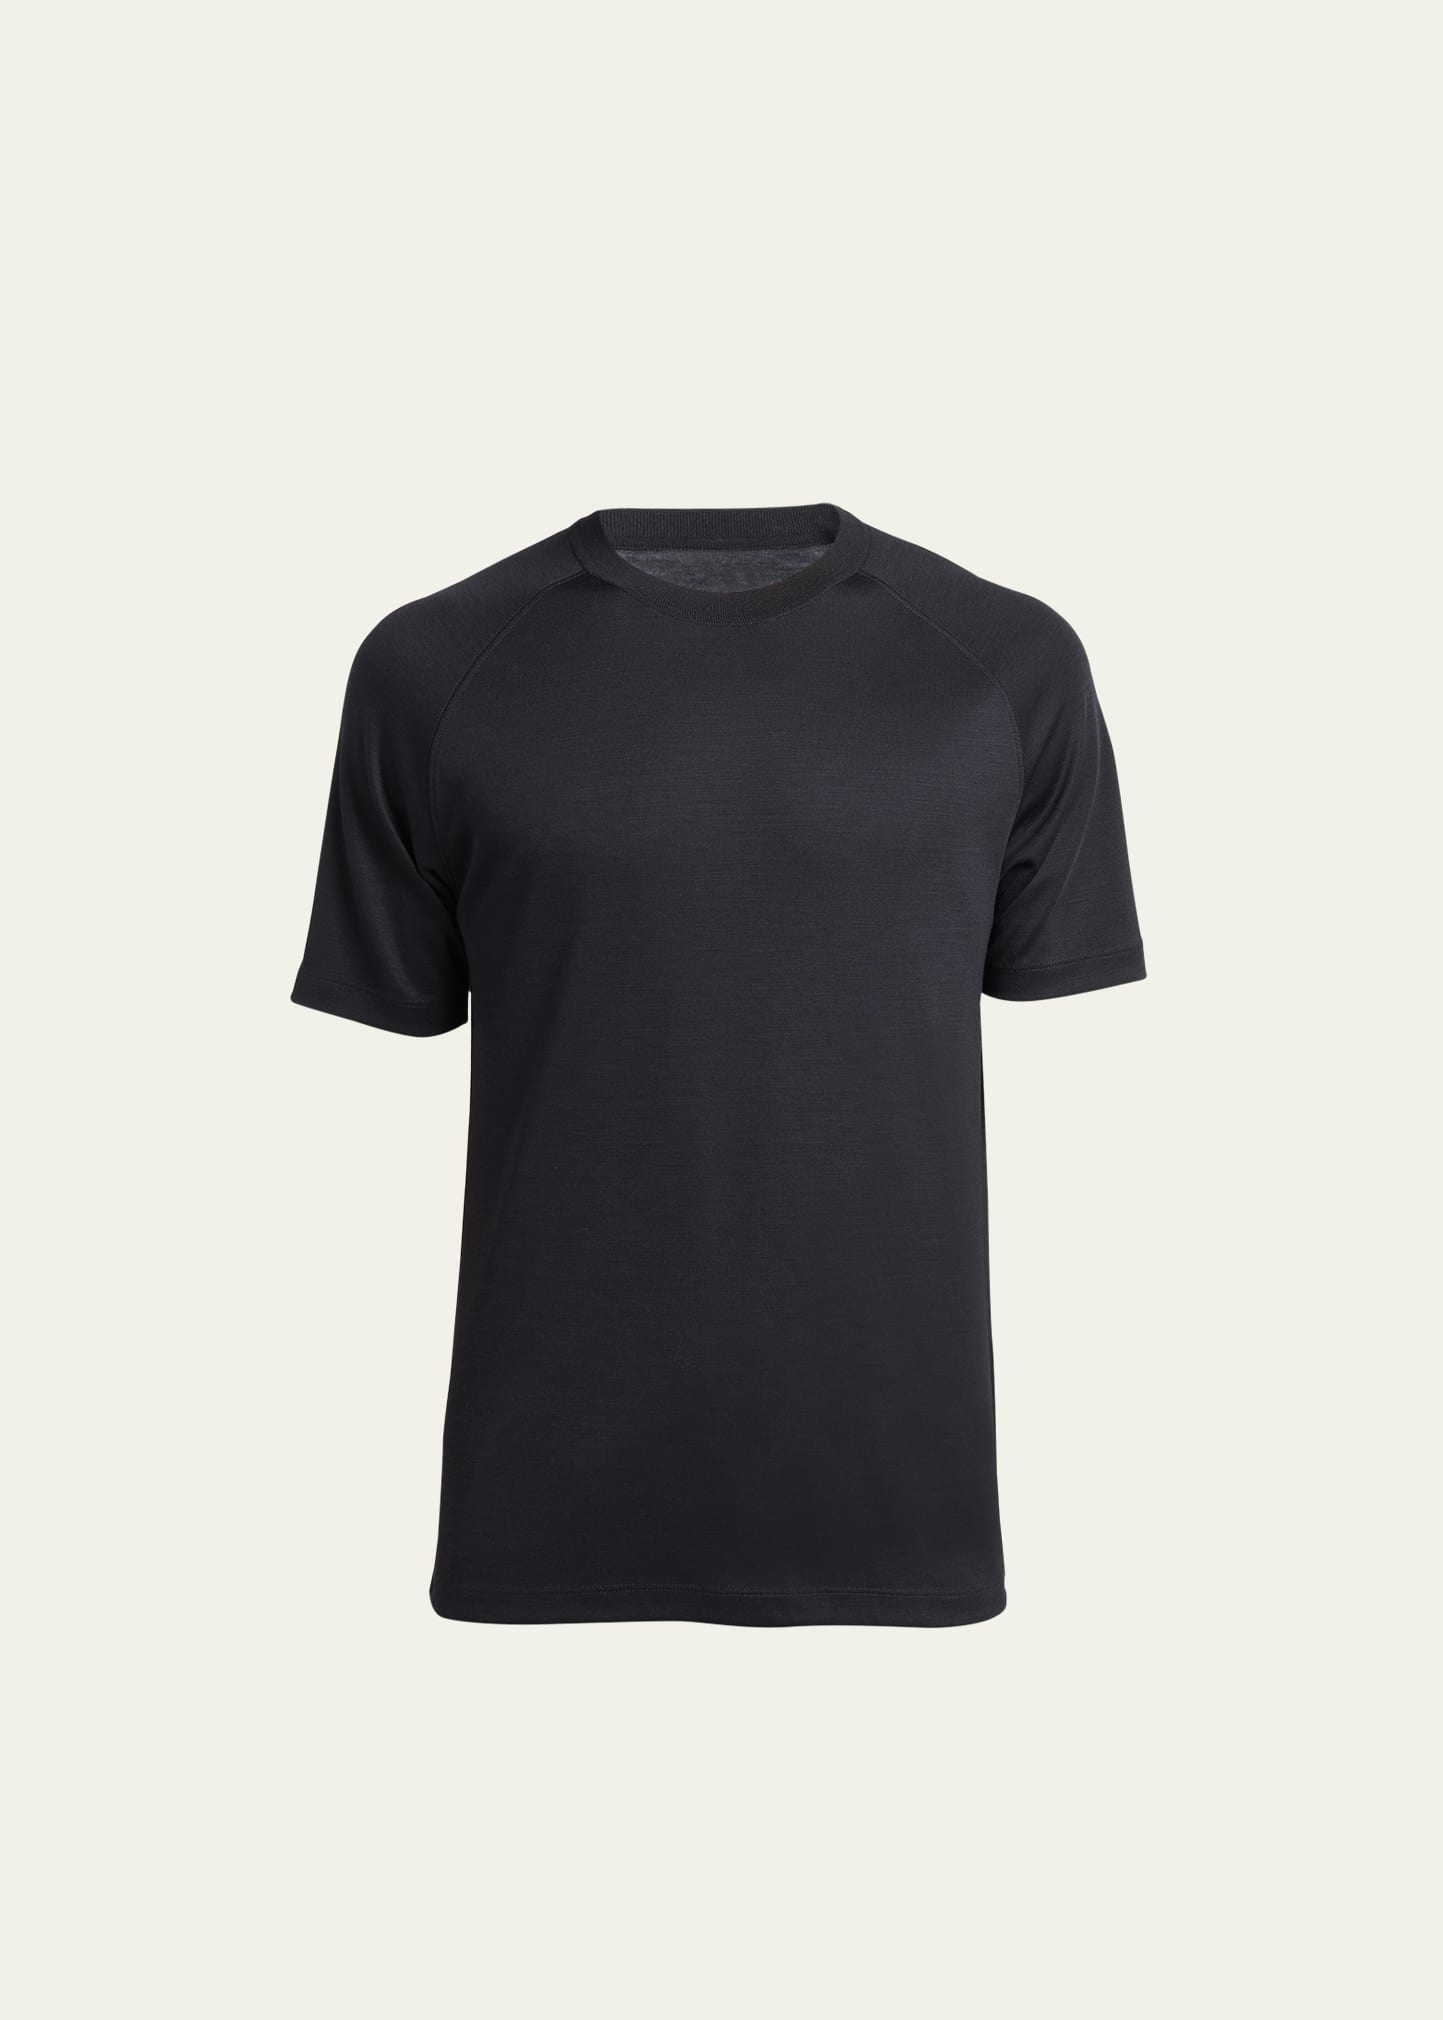 Zegna Men's Wool-stretch Crewneck T-shirt In Nvy Sld